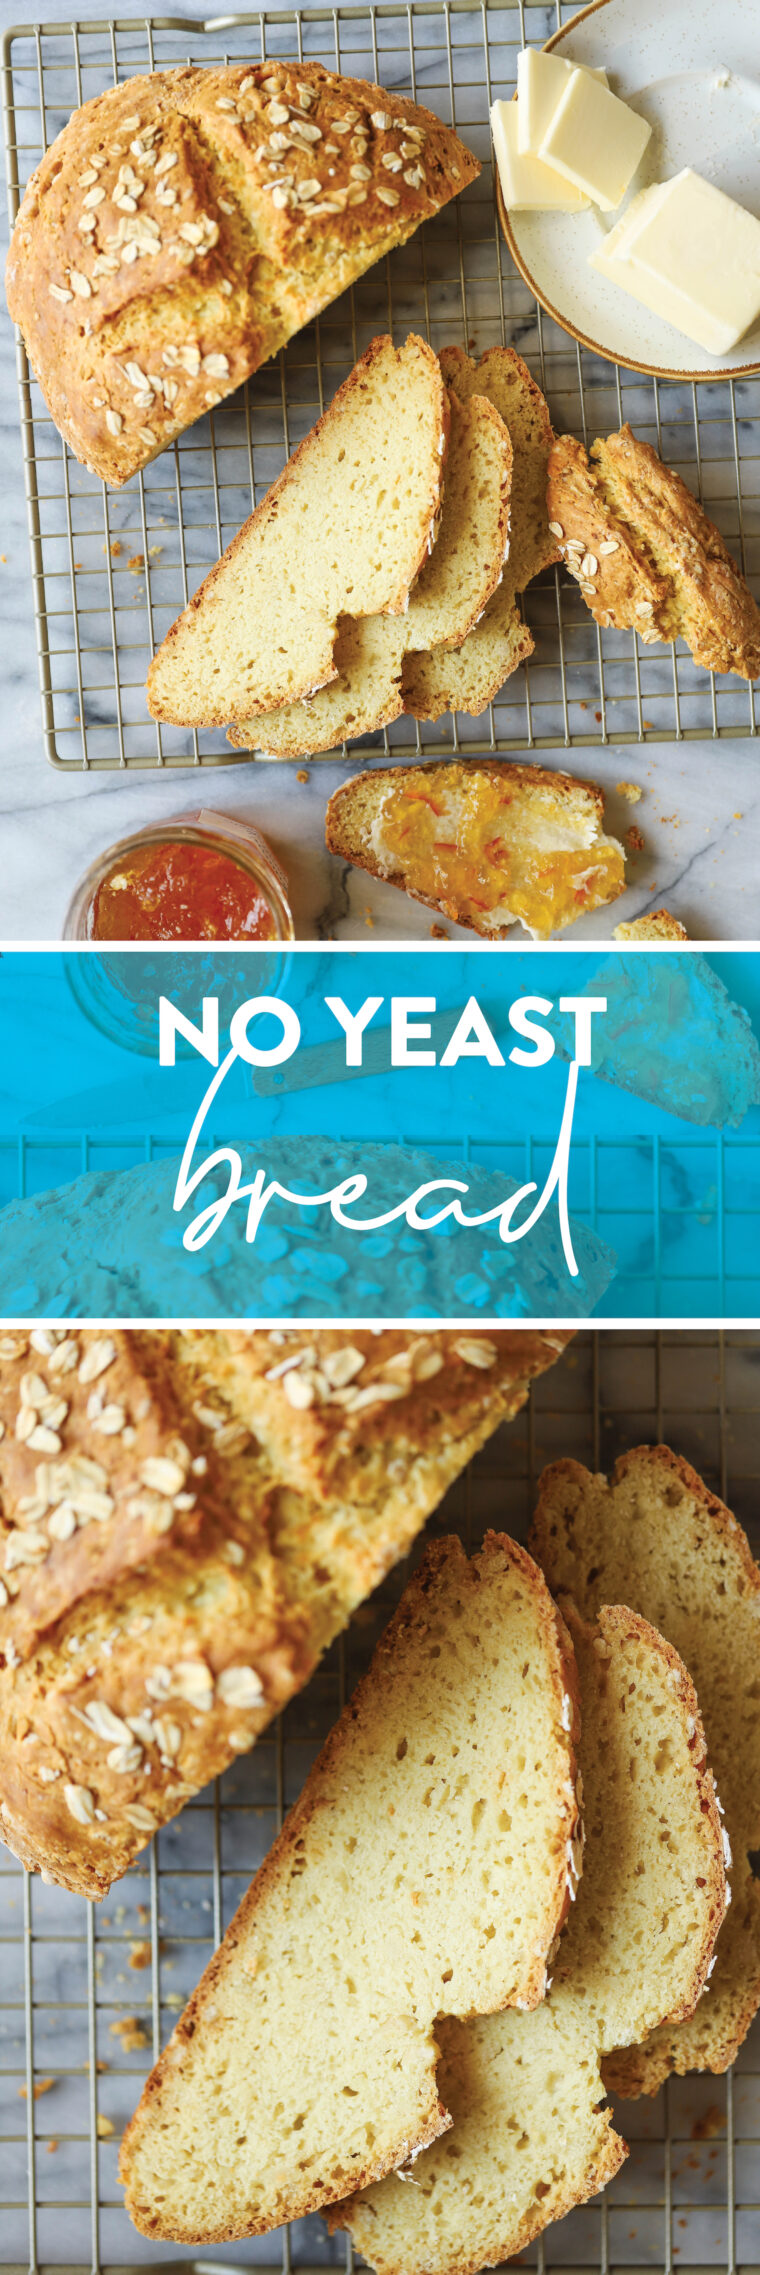 No Yeast Bread - Yes, you can make beautiful homemade rustic bread WITHOUT the yeast, proof, or rise. Made so quickly + easily. AND SO GOOD.